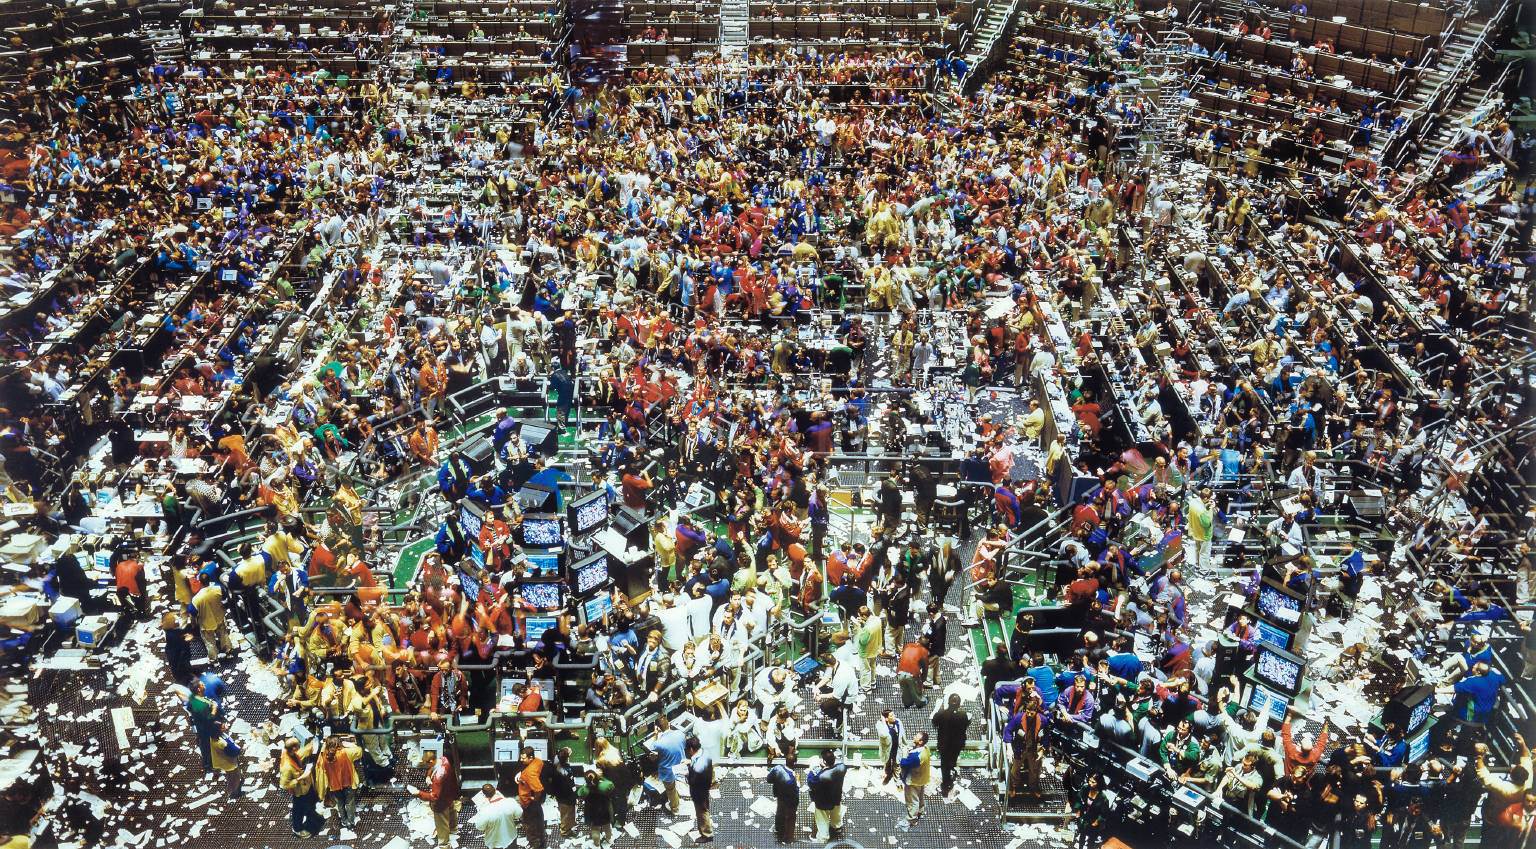 Chicago, Board of Trade II 1999 Andreas Gursky born 1955 Presented by the artist 2000 http://www.tate.org.uk/art/work/P20191